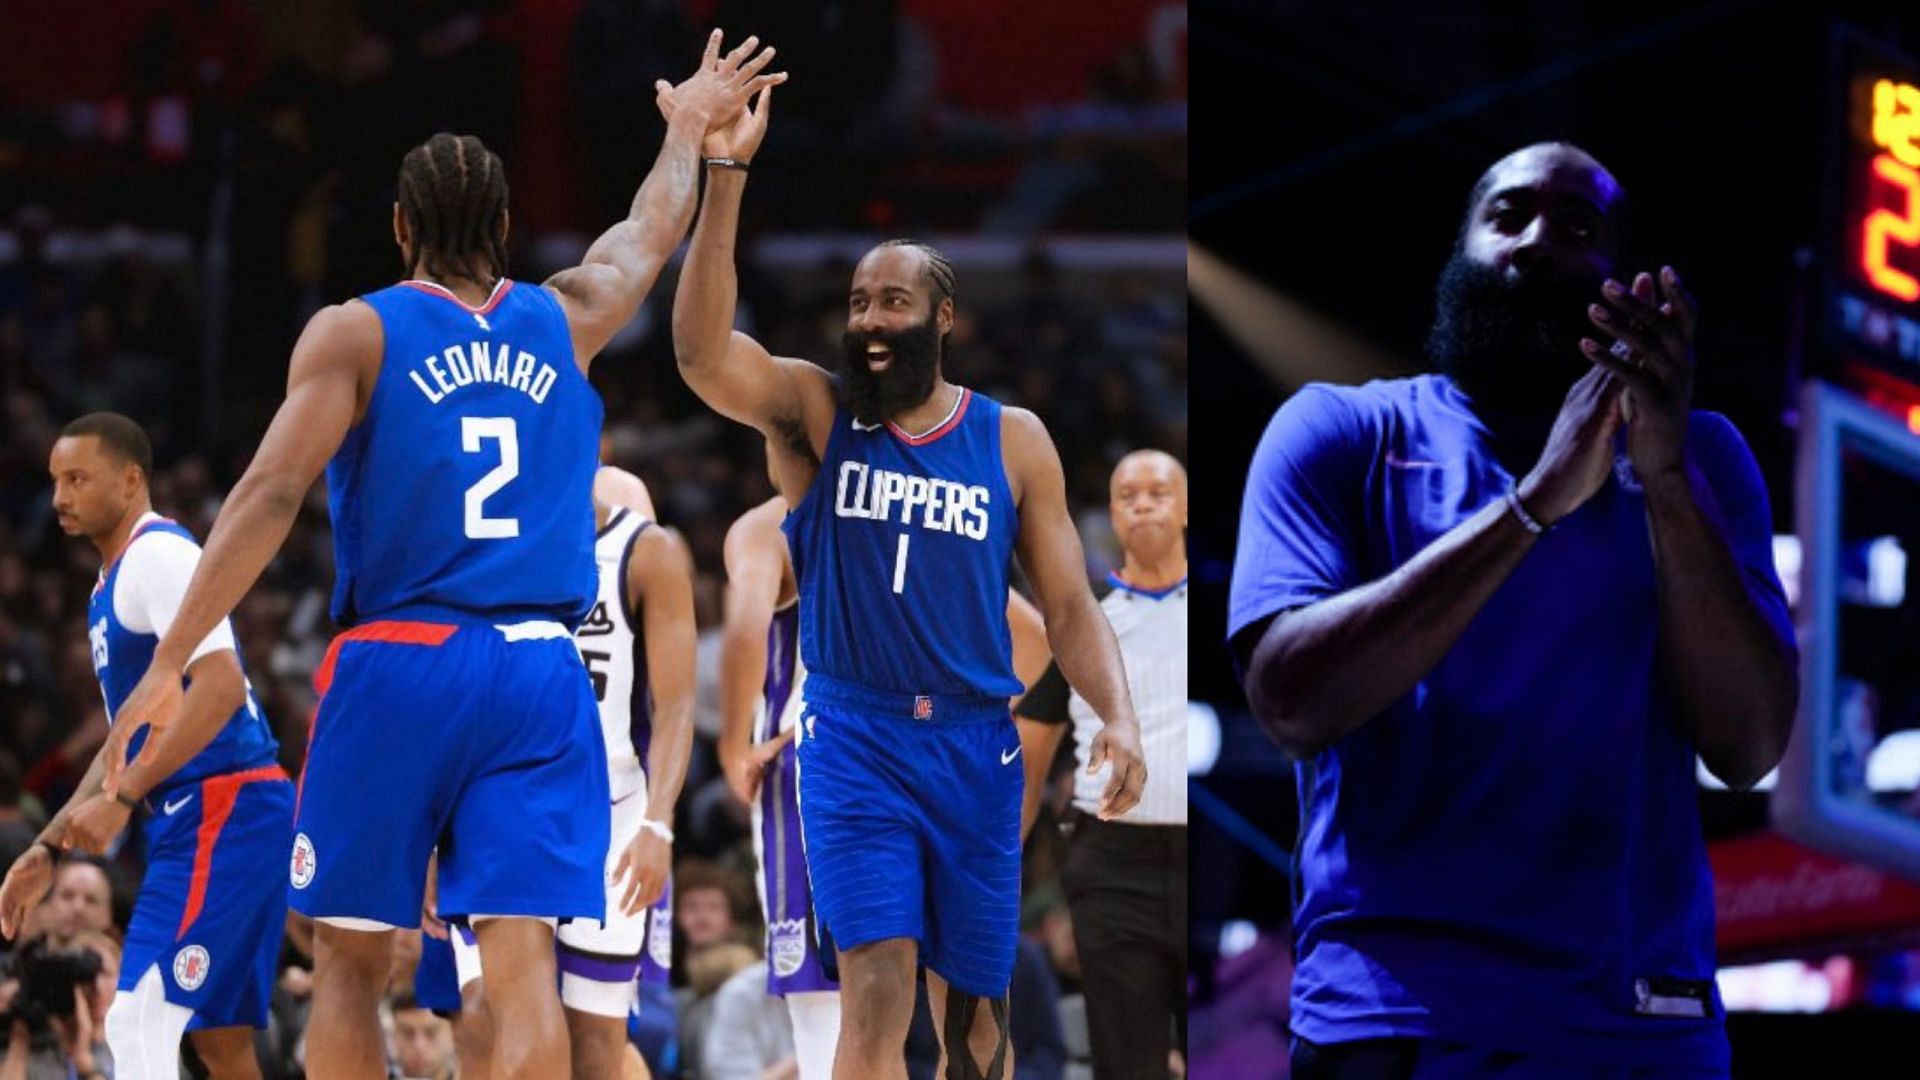 Clippers redefined: James Harden